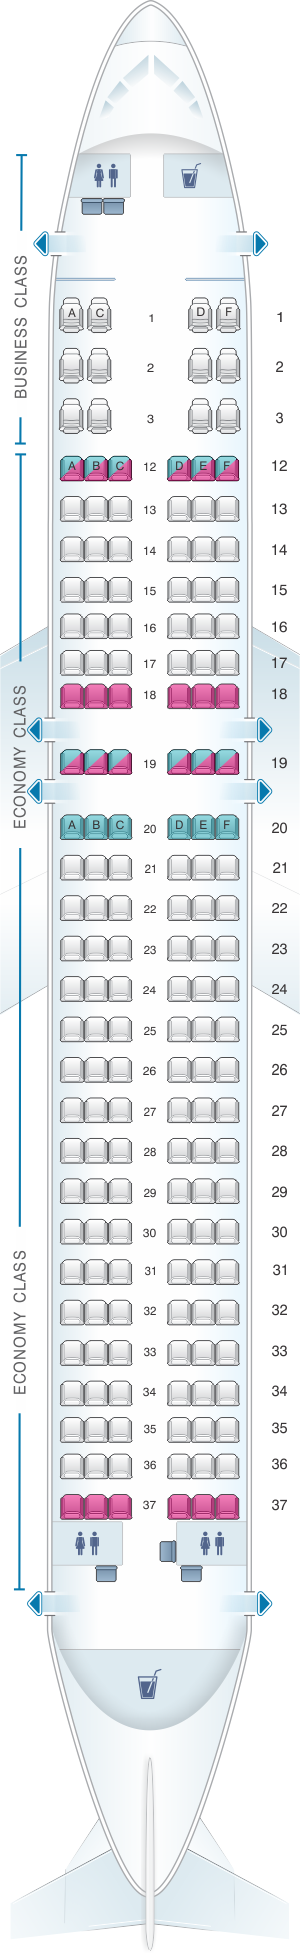 Seat map for Air Canada Airbus A320 200 Rouge